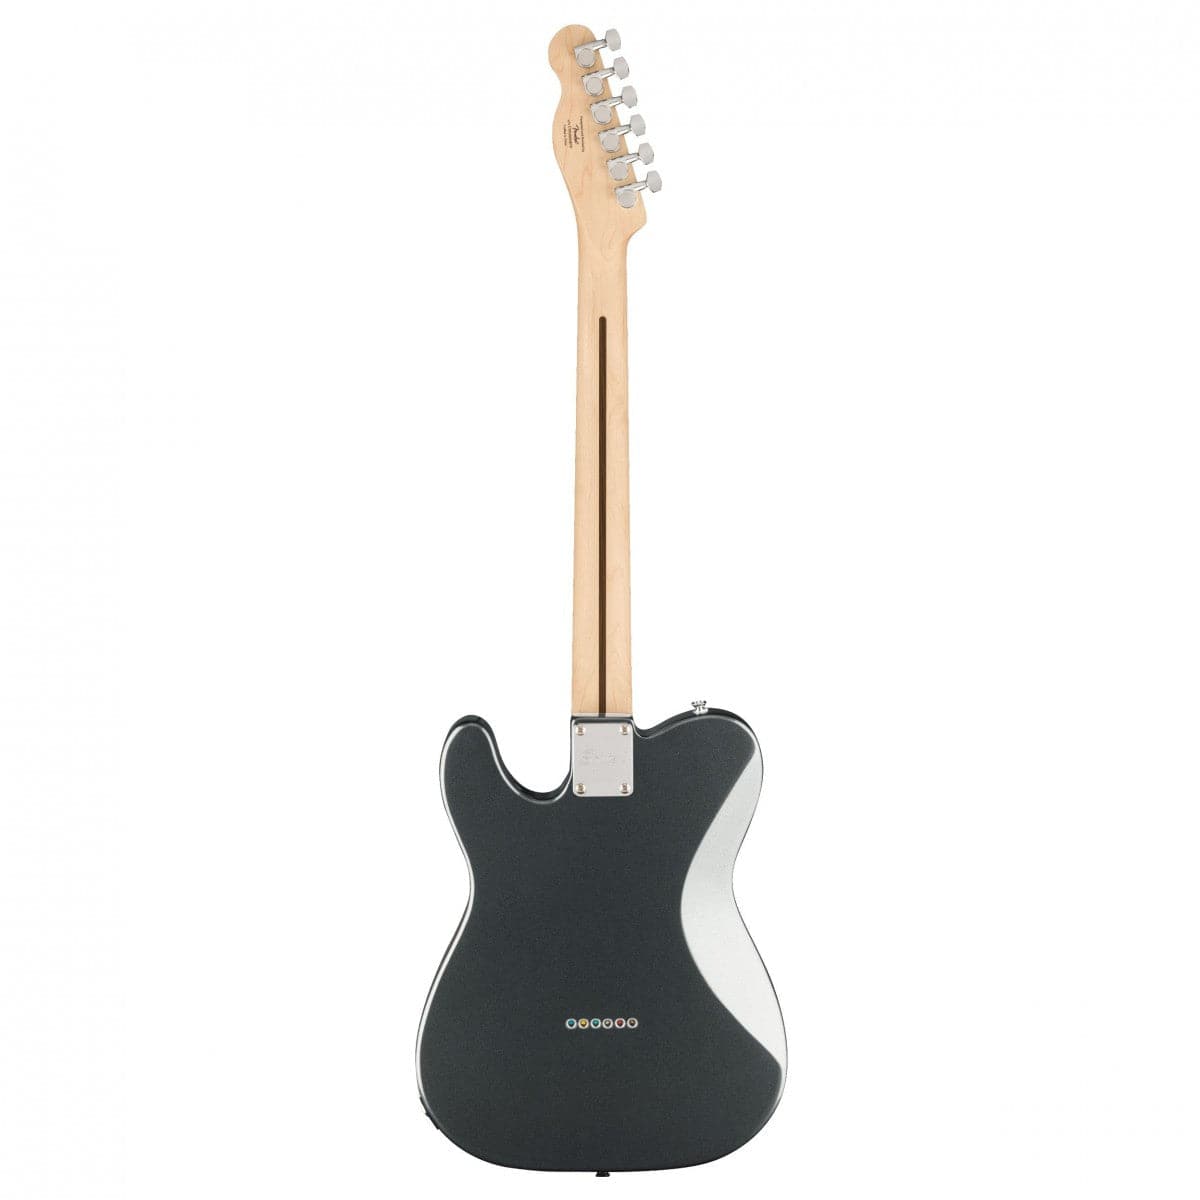 Squier Affinity Telecaster Deluxe - Charcoal Frost Metallic